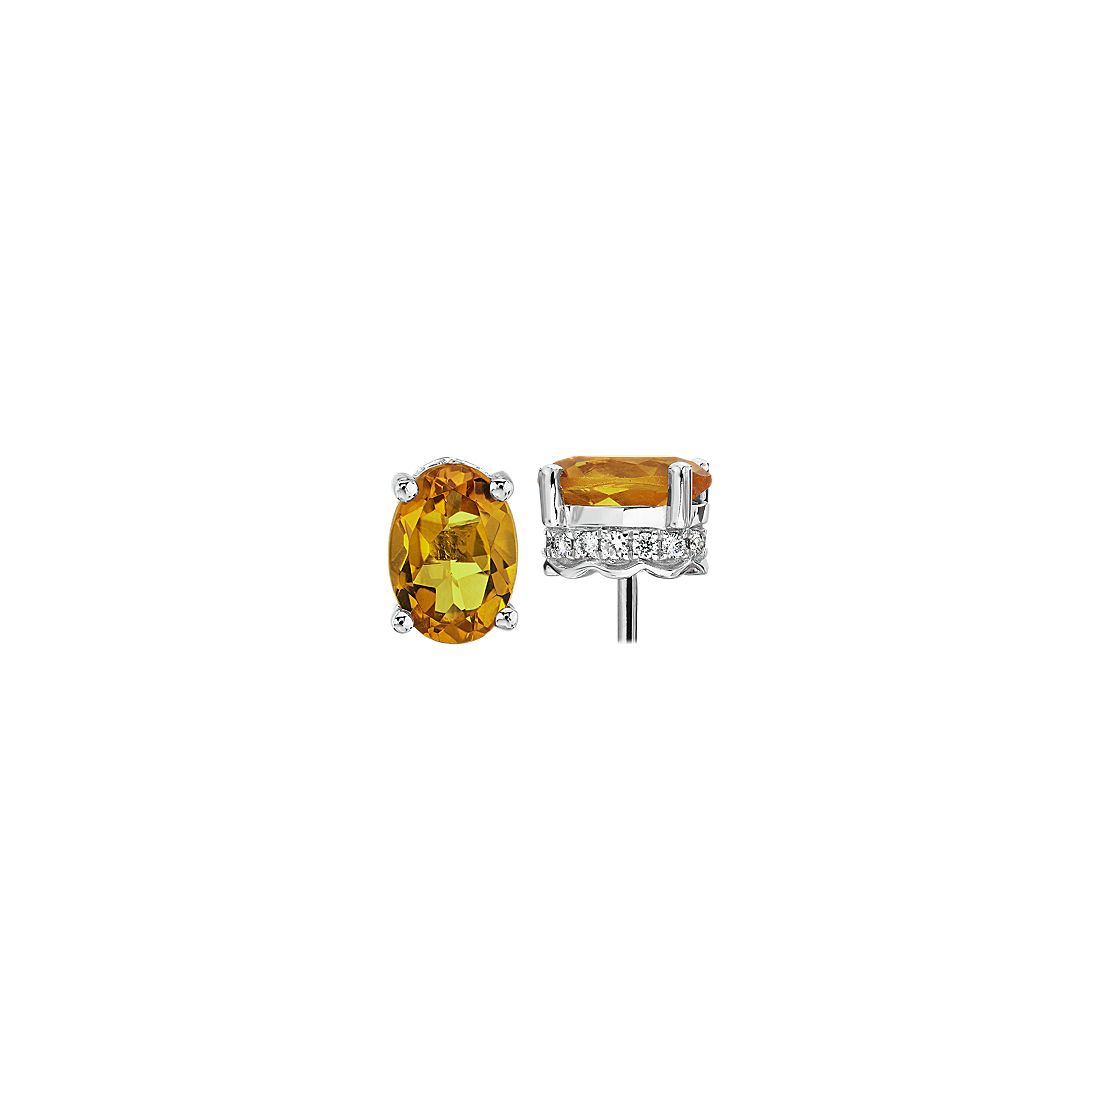 Oval Citrine and Diamond Earrings in 14k White Gold (7x5mm)